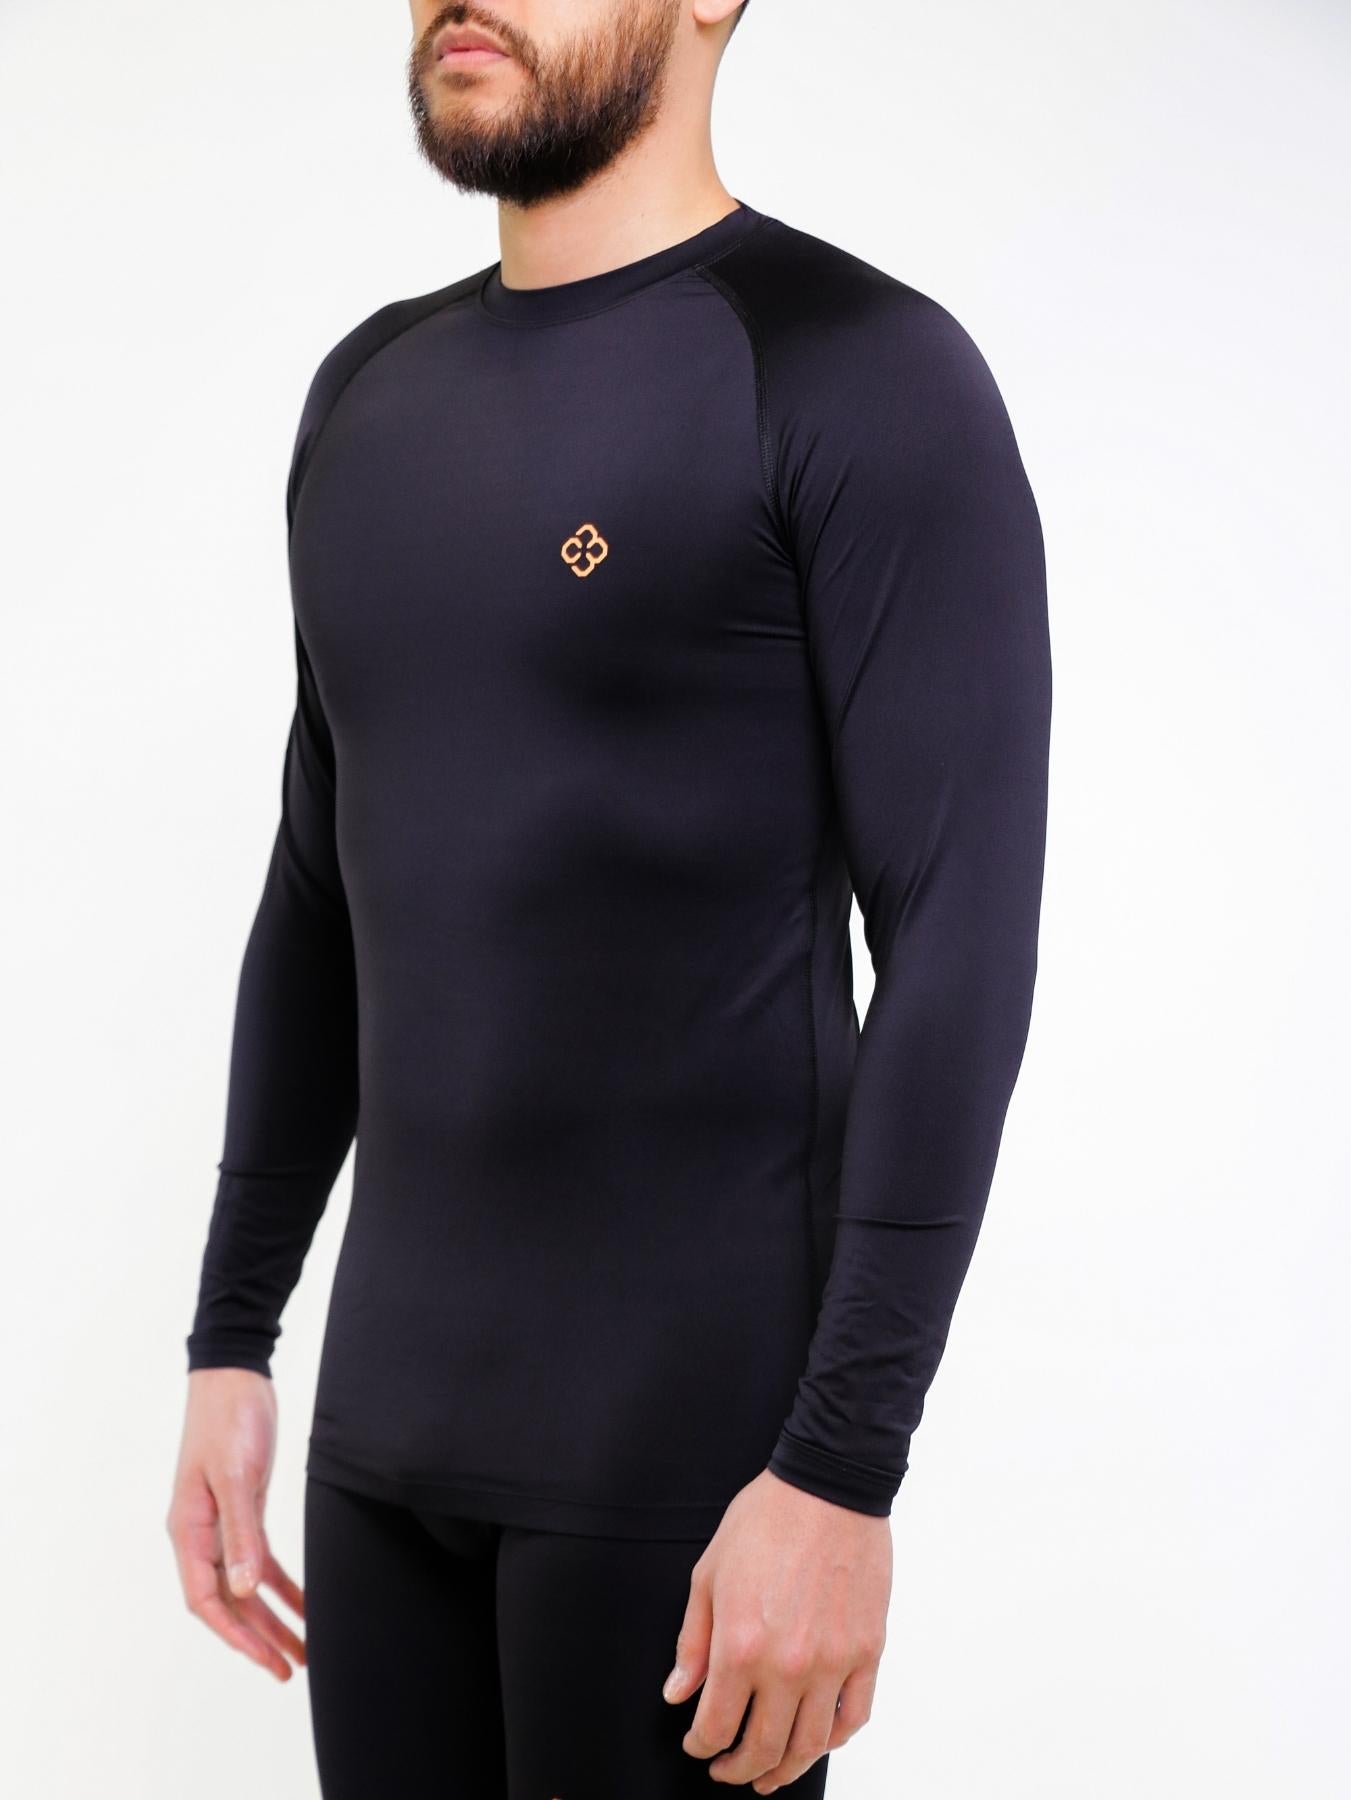 Copper Compression Men's Base Layer Long Sleeve Macao